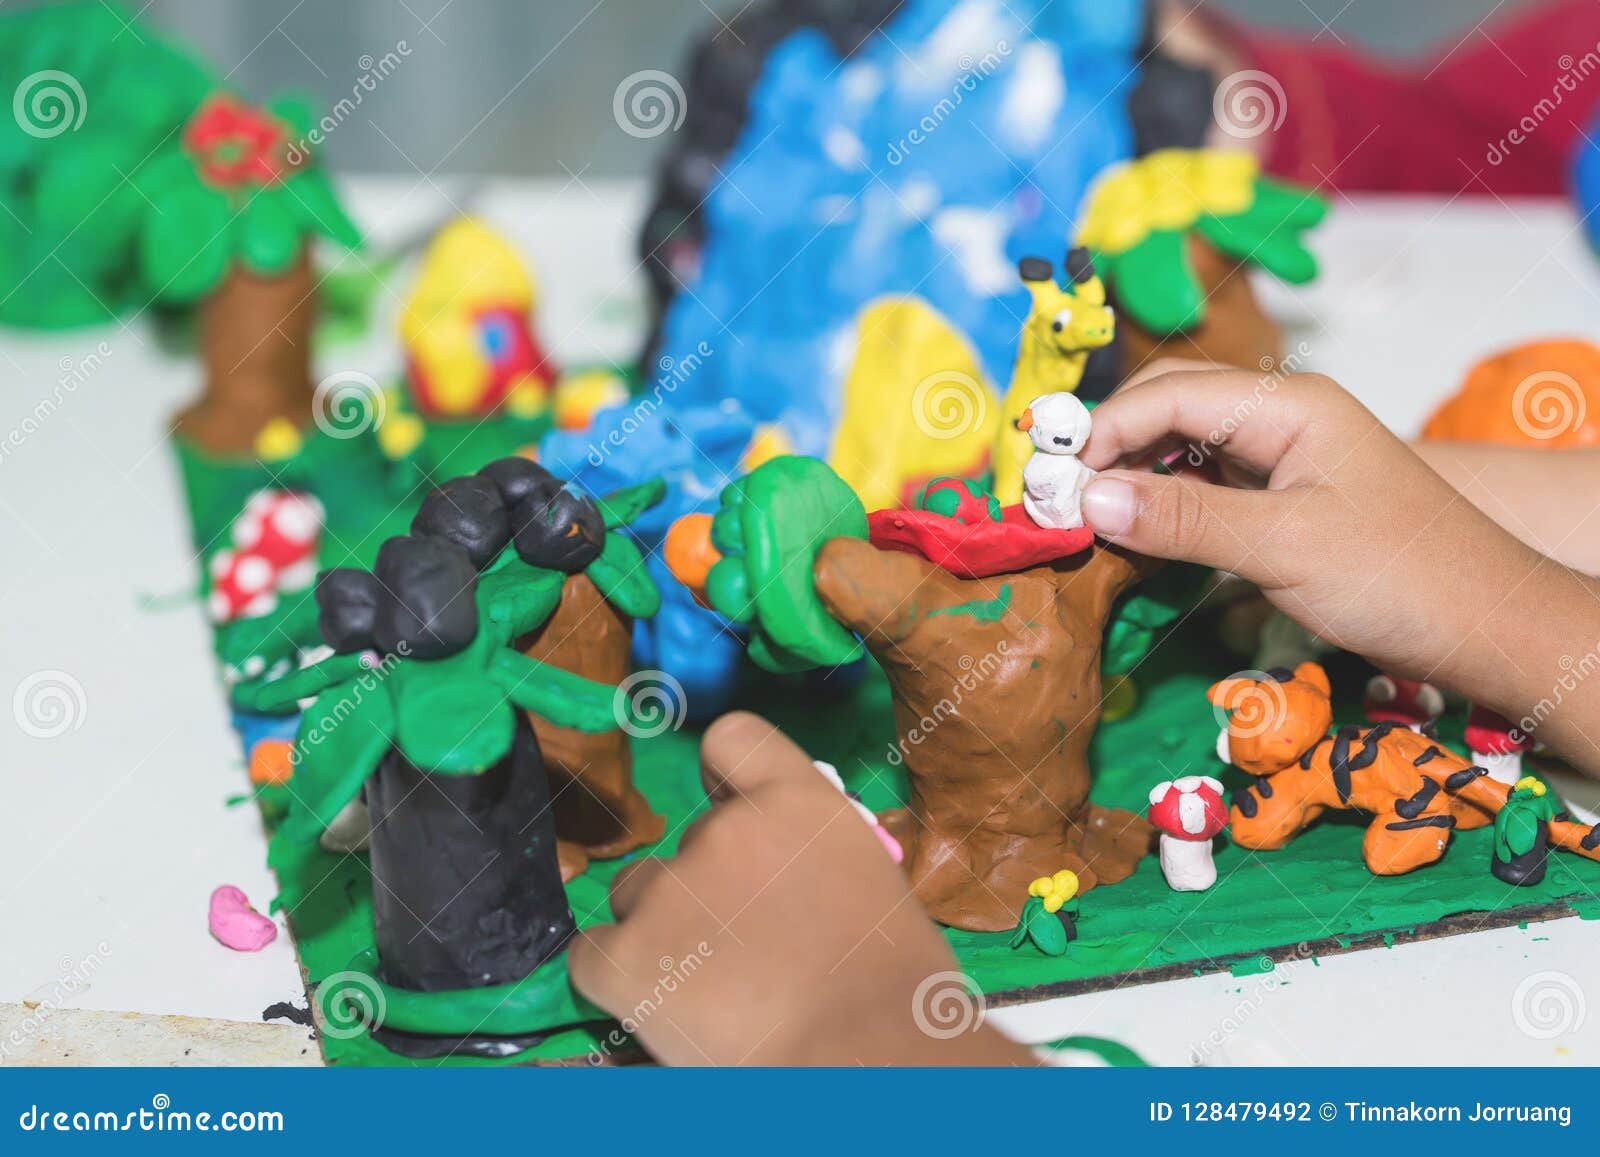 Child Playing With Clay Molding Shapes Stock Photo, Picture and Royalty  Free Image. Image 94228238.